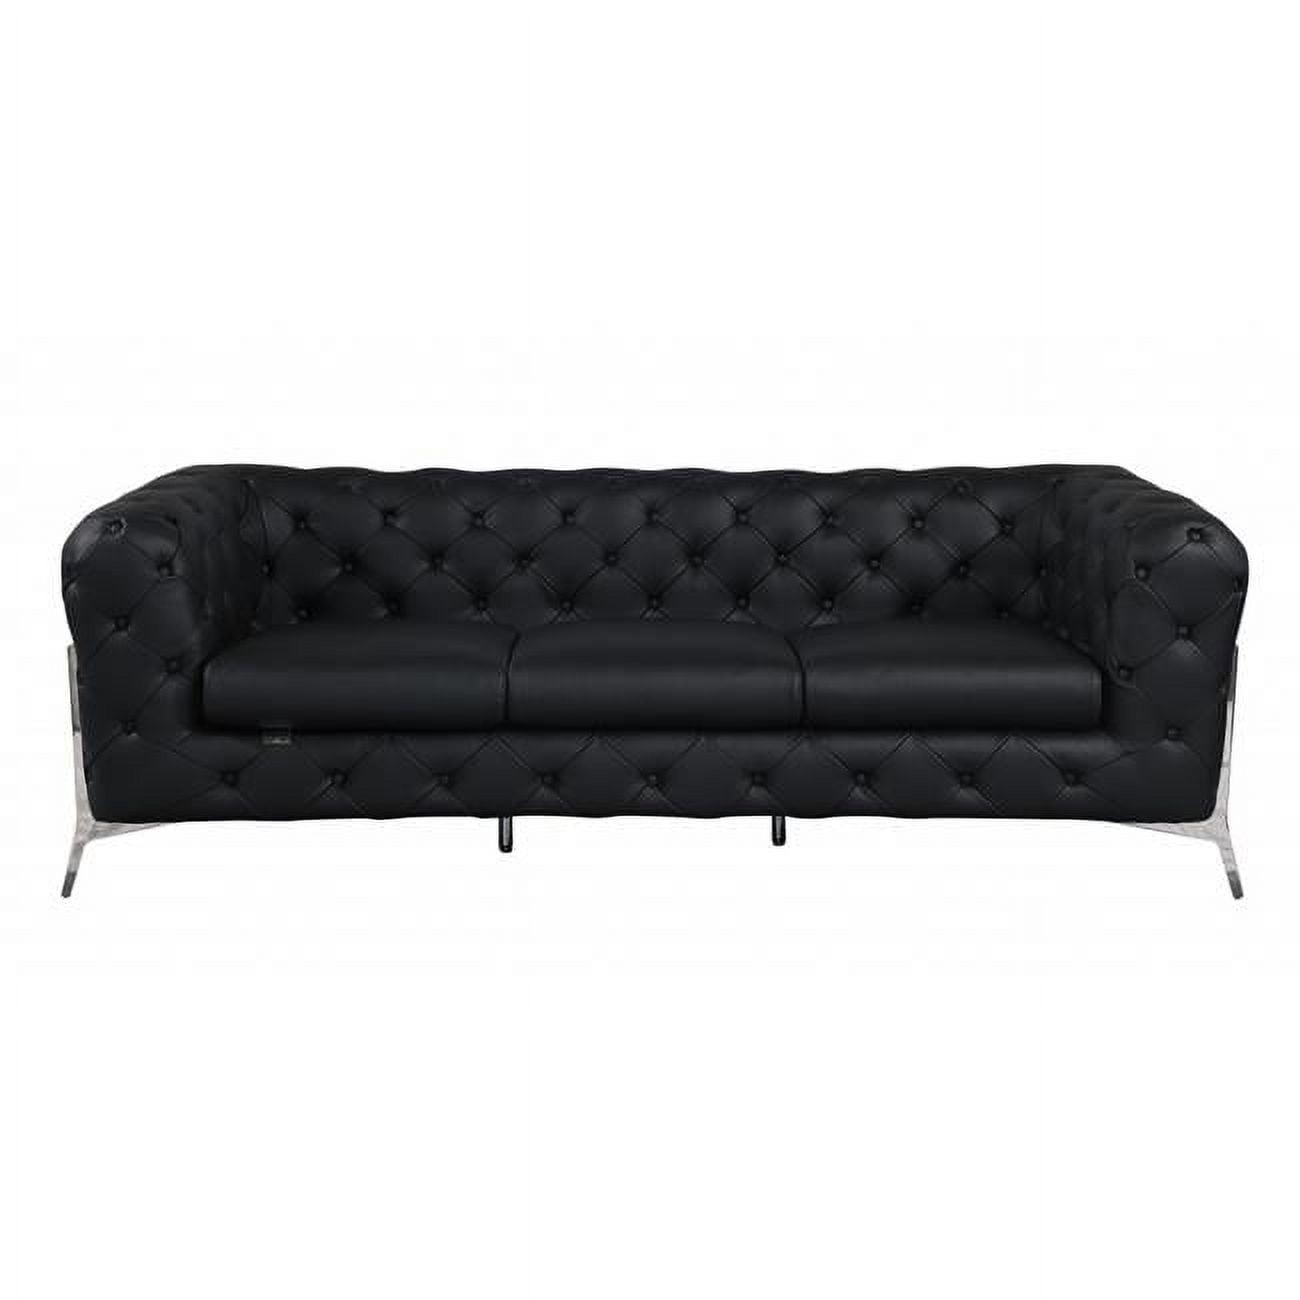 93" Luxe Black Genuine Leather Tufted Sleeper Sofa with Chrome Legs